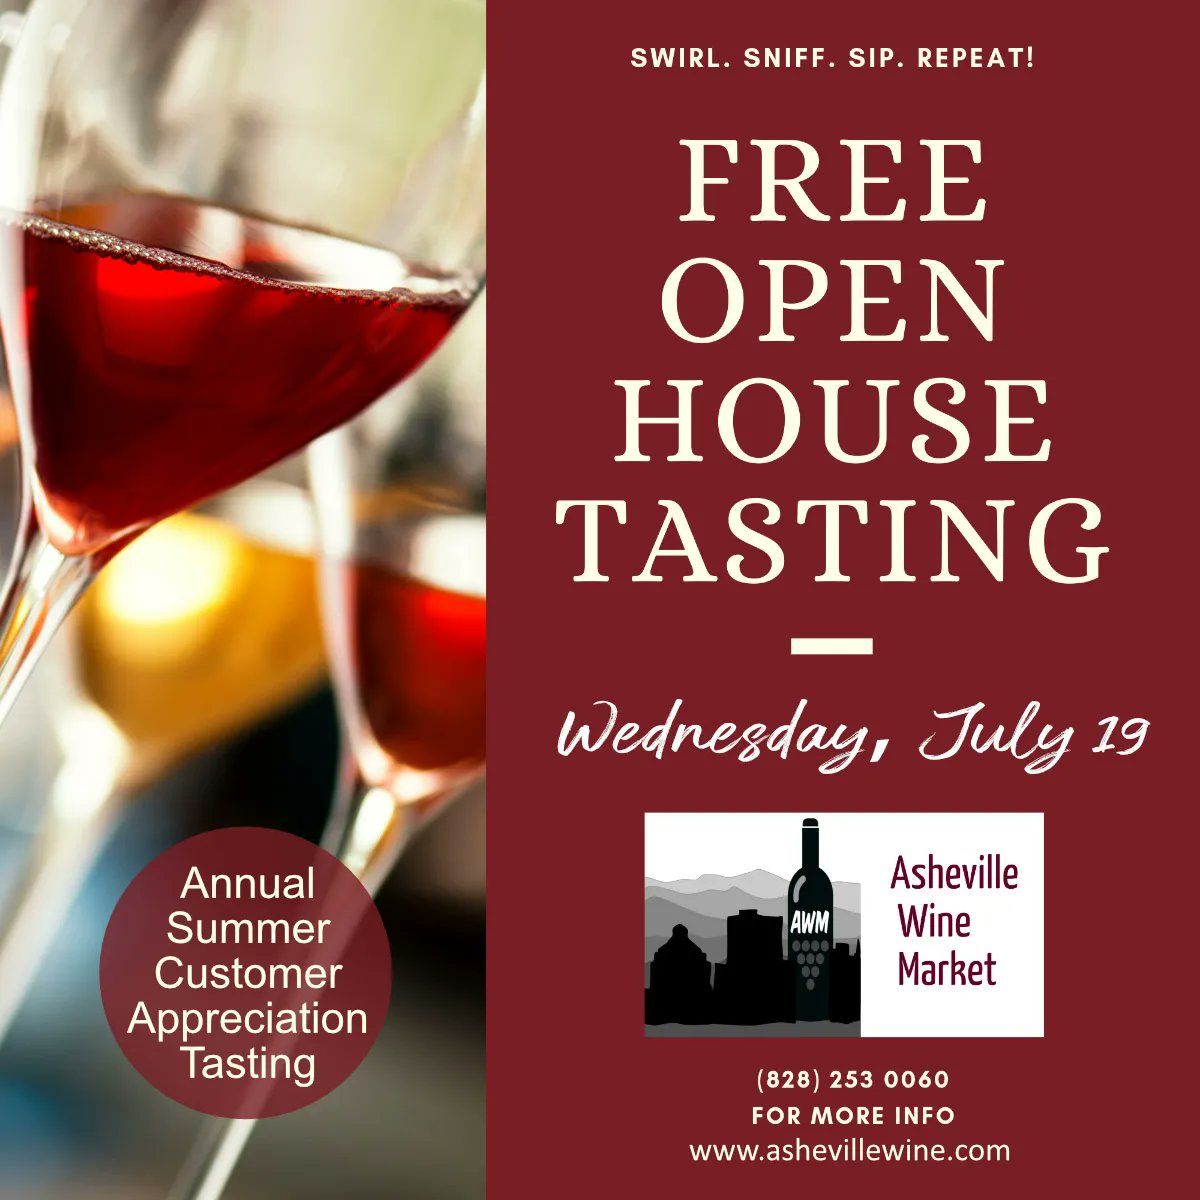 30th Anniversary Open House Tasting and Customer Appreciation Sale
20% off wines by case* Join us for an evening of celebration and appreciation at the Asheville Wine Market! 
#winetasting #winesale